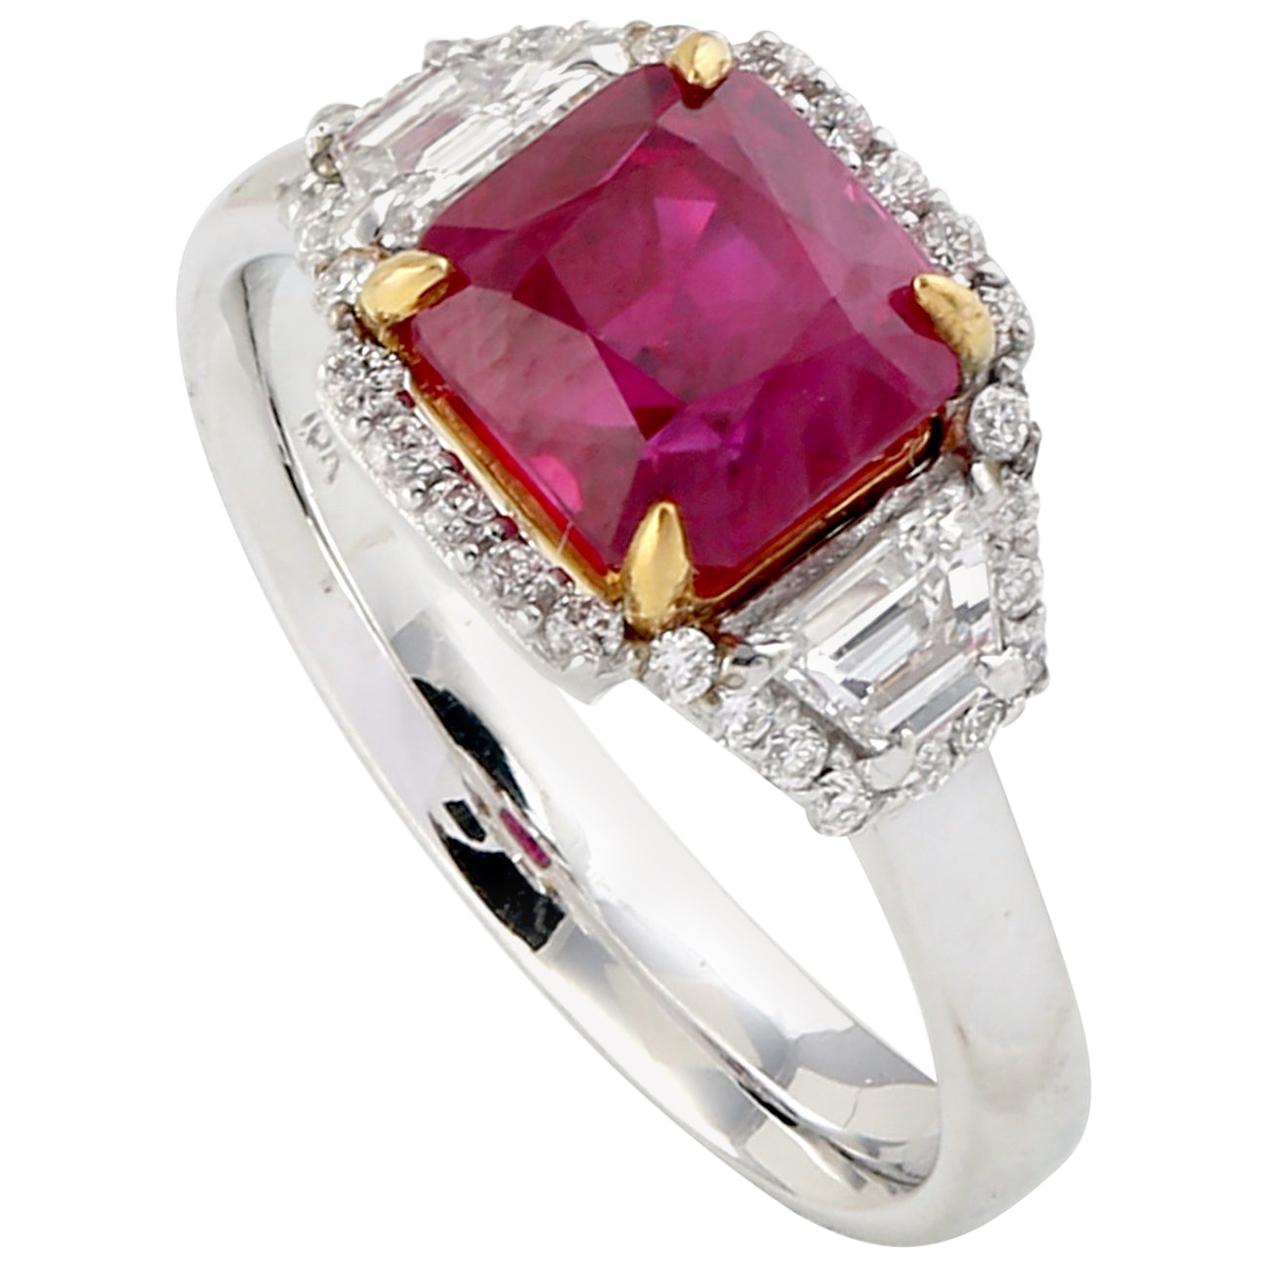 Cushion Shape Ruby Ring with Diamond Baguettes Set in 18 Karat White Gold